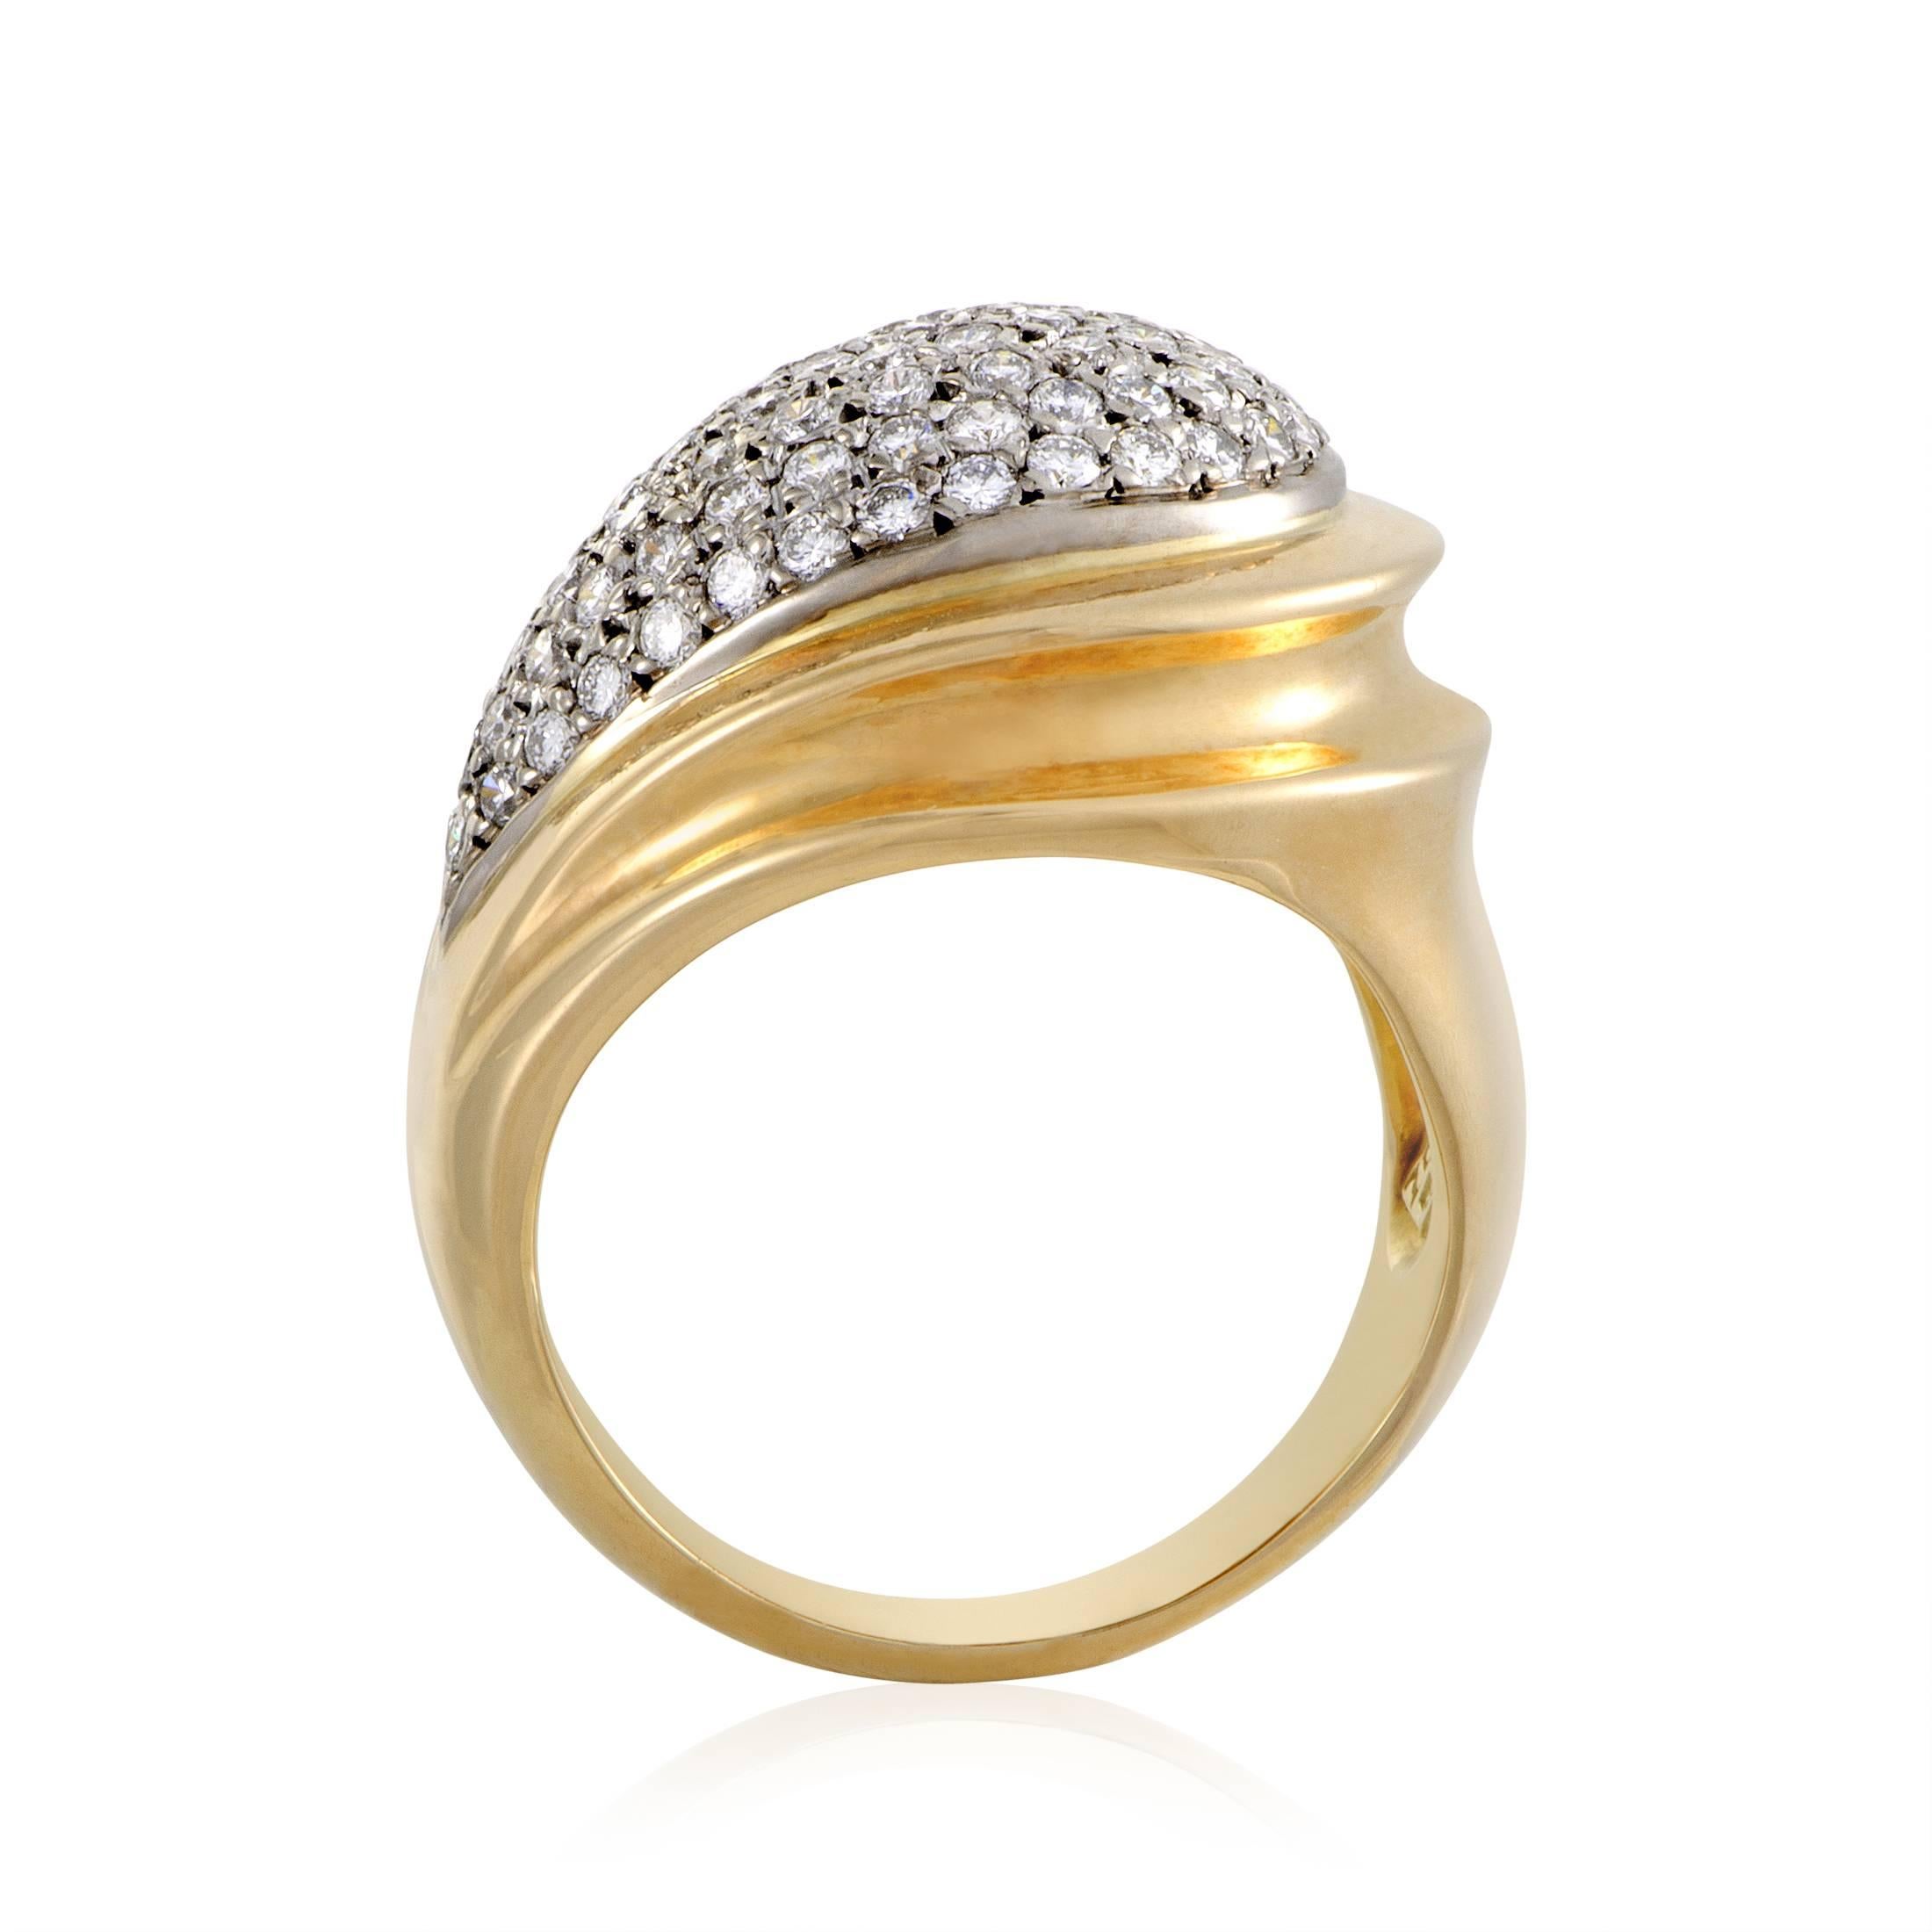 Arranged in a fascinating manner to produce a dazzling effect, the resplendent diamonds weighing in total approximately 1.00 carat are placed against 18K white gold in this exquisite 18K yellow gold ring from Zolotas. 
Ring Top Dimensions: 24 x 21